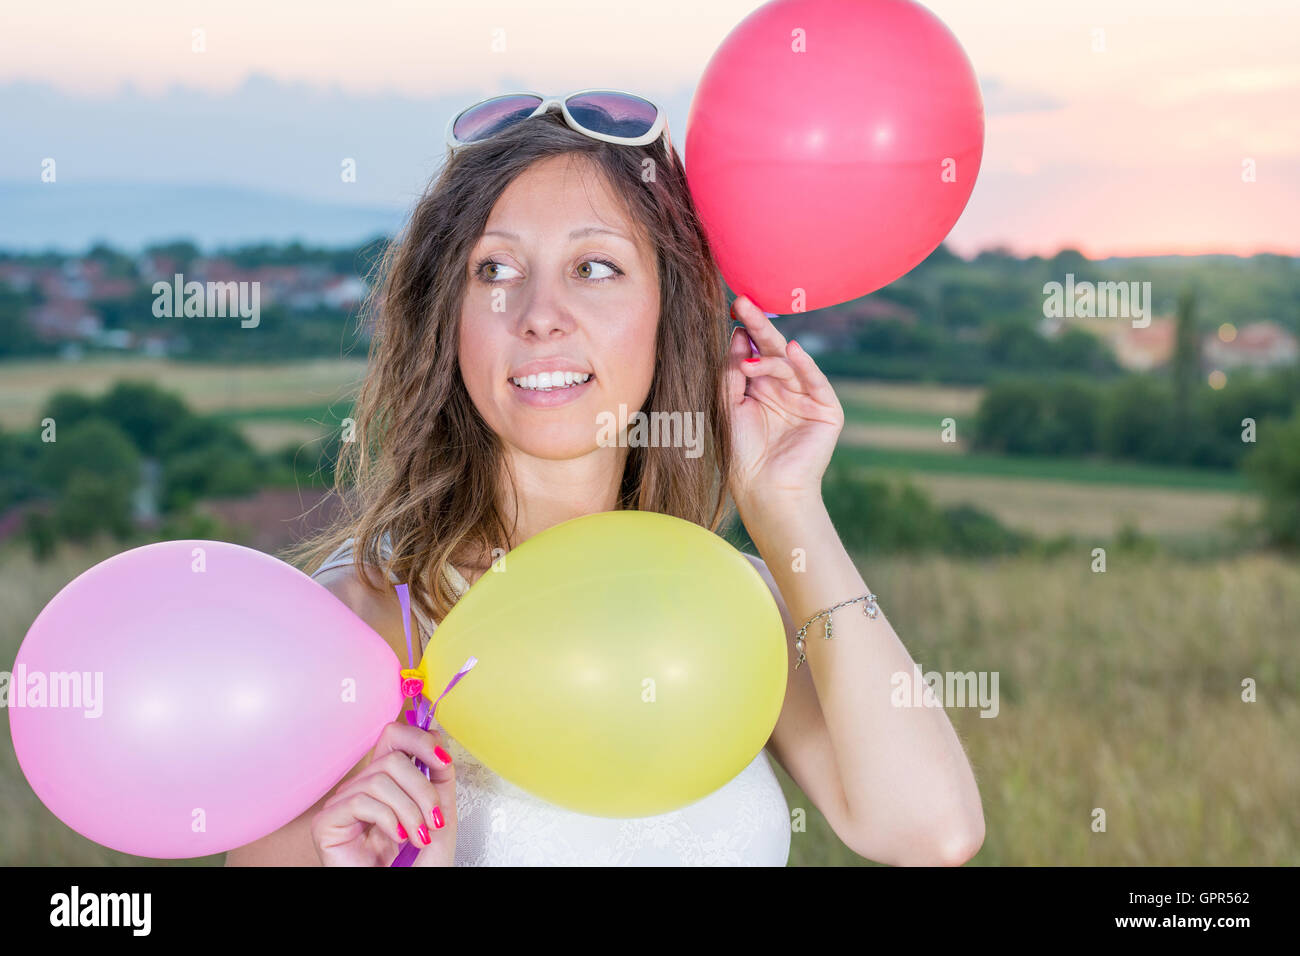 Young woman holding balloons at romantic sunset Stock Photo